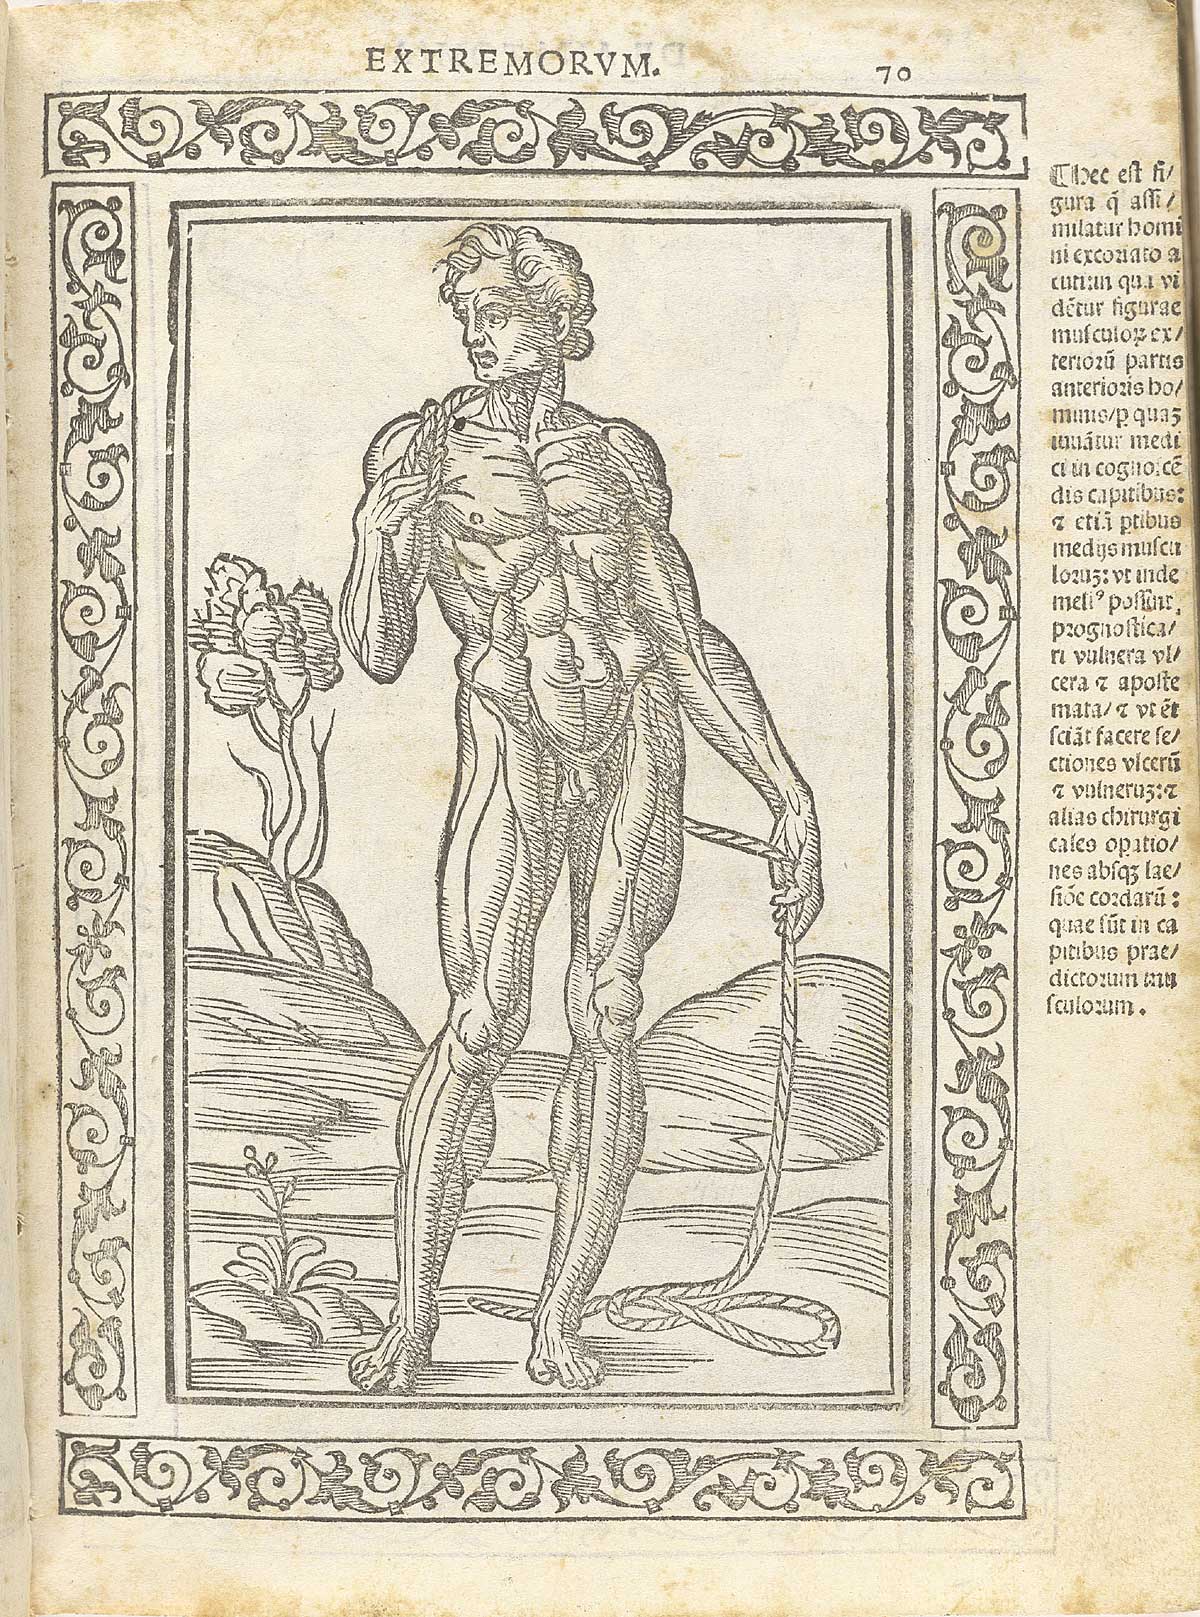 Woodcut facing nude male figure showing musculature, standing in a pastoral setting with right hand stretched out holding a rope which is draped to the left hand and down to the ground; with a woodcut border and text in Latin on the right side of page, from Berengario da Carpi’s Isagogae breues, Bologna, 1523, NLM Call no. WZ 240 B488i 1523.